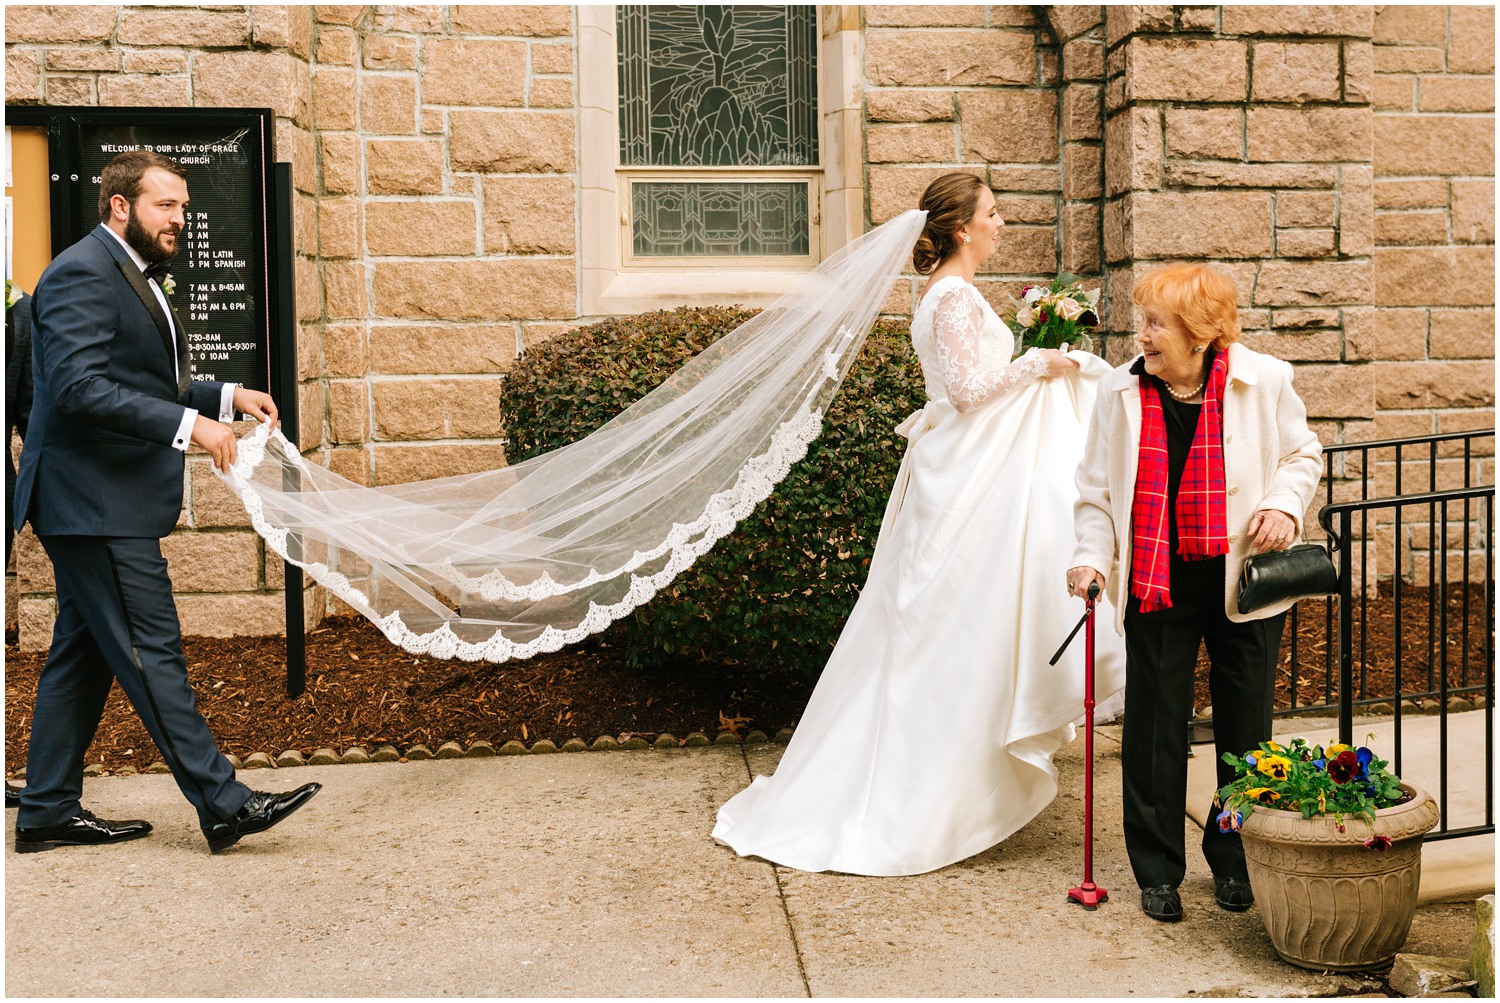 groomsman carries bride's veil while talking to guest